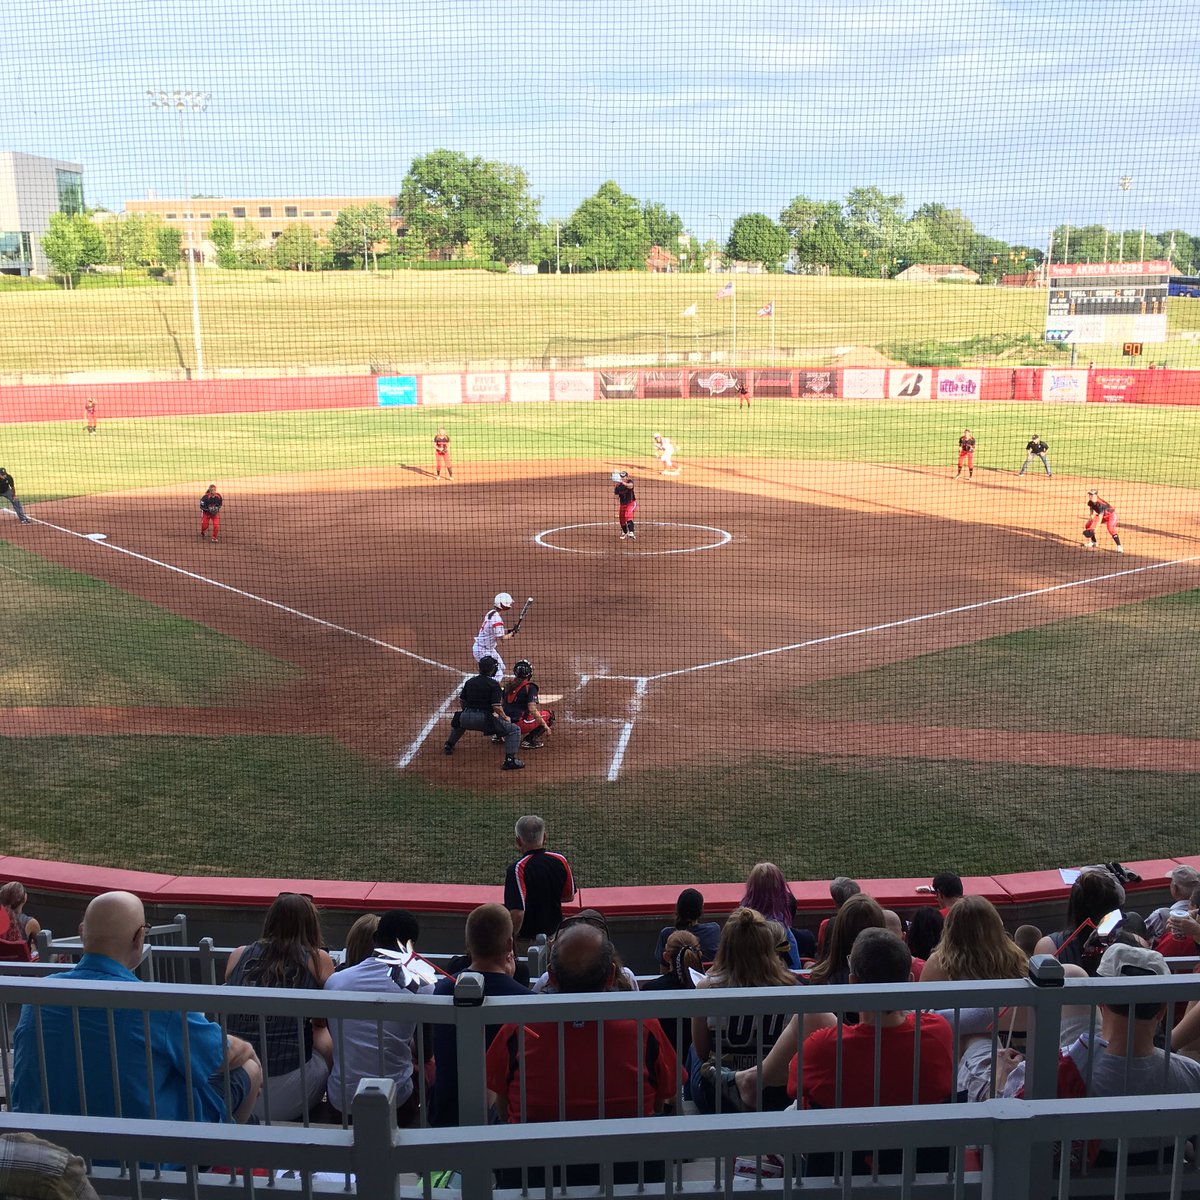 At an #akronracers #softball  #firestonepark Nice day for a ball game! Batter up! #summitpeeks Go Akron!!